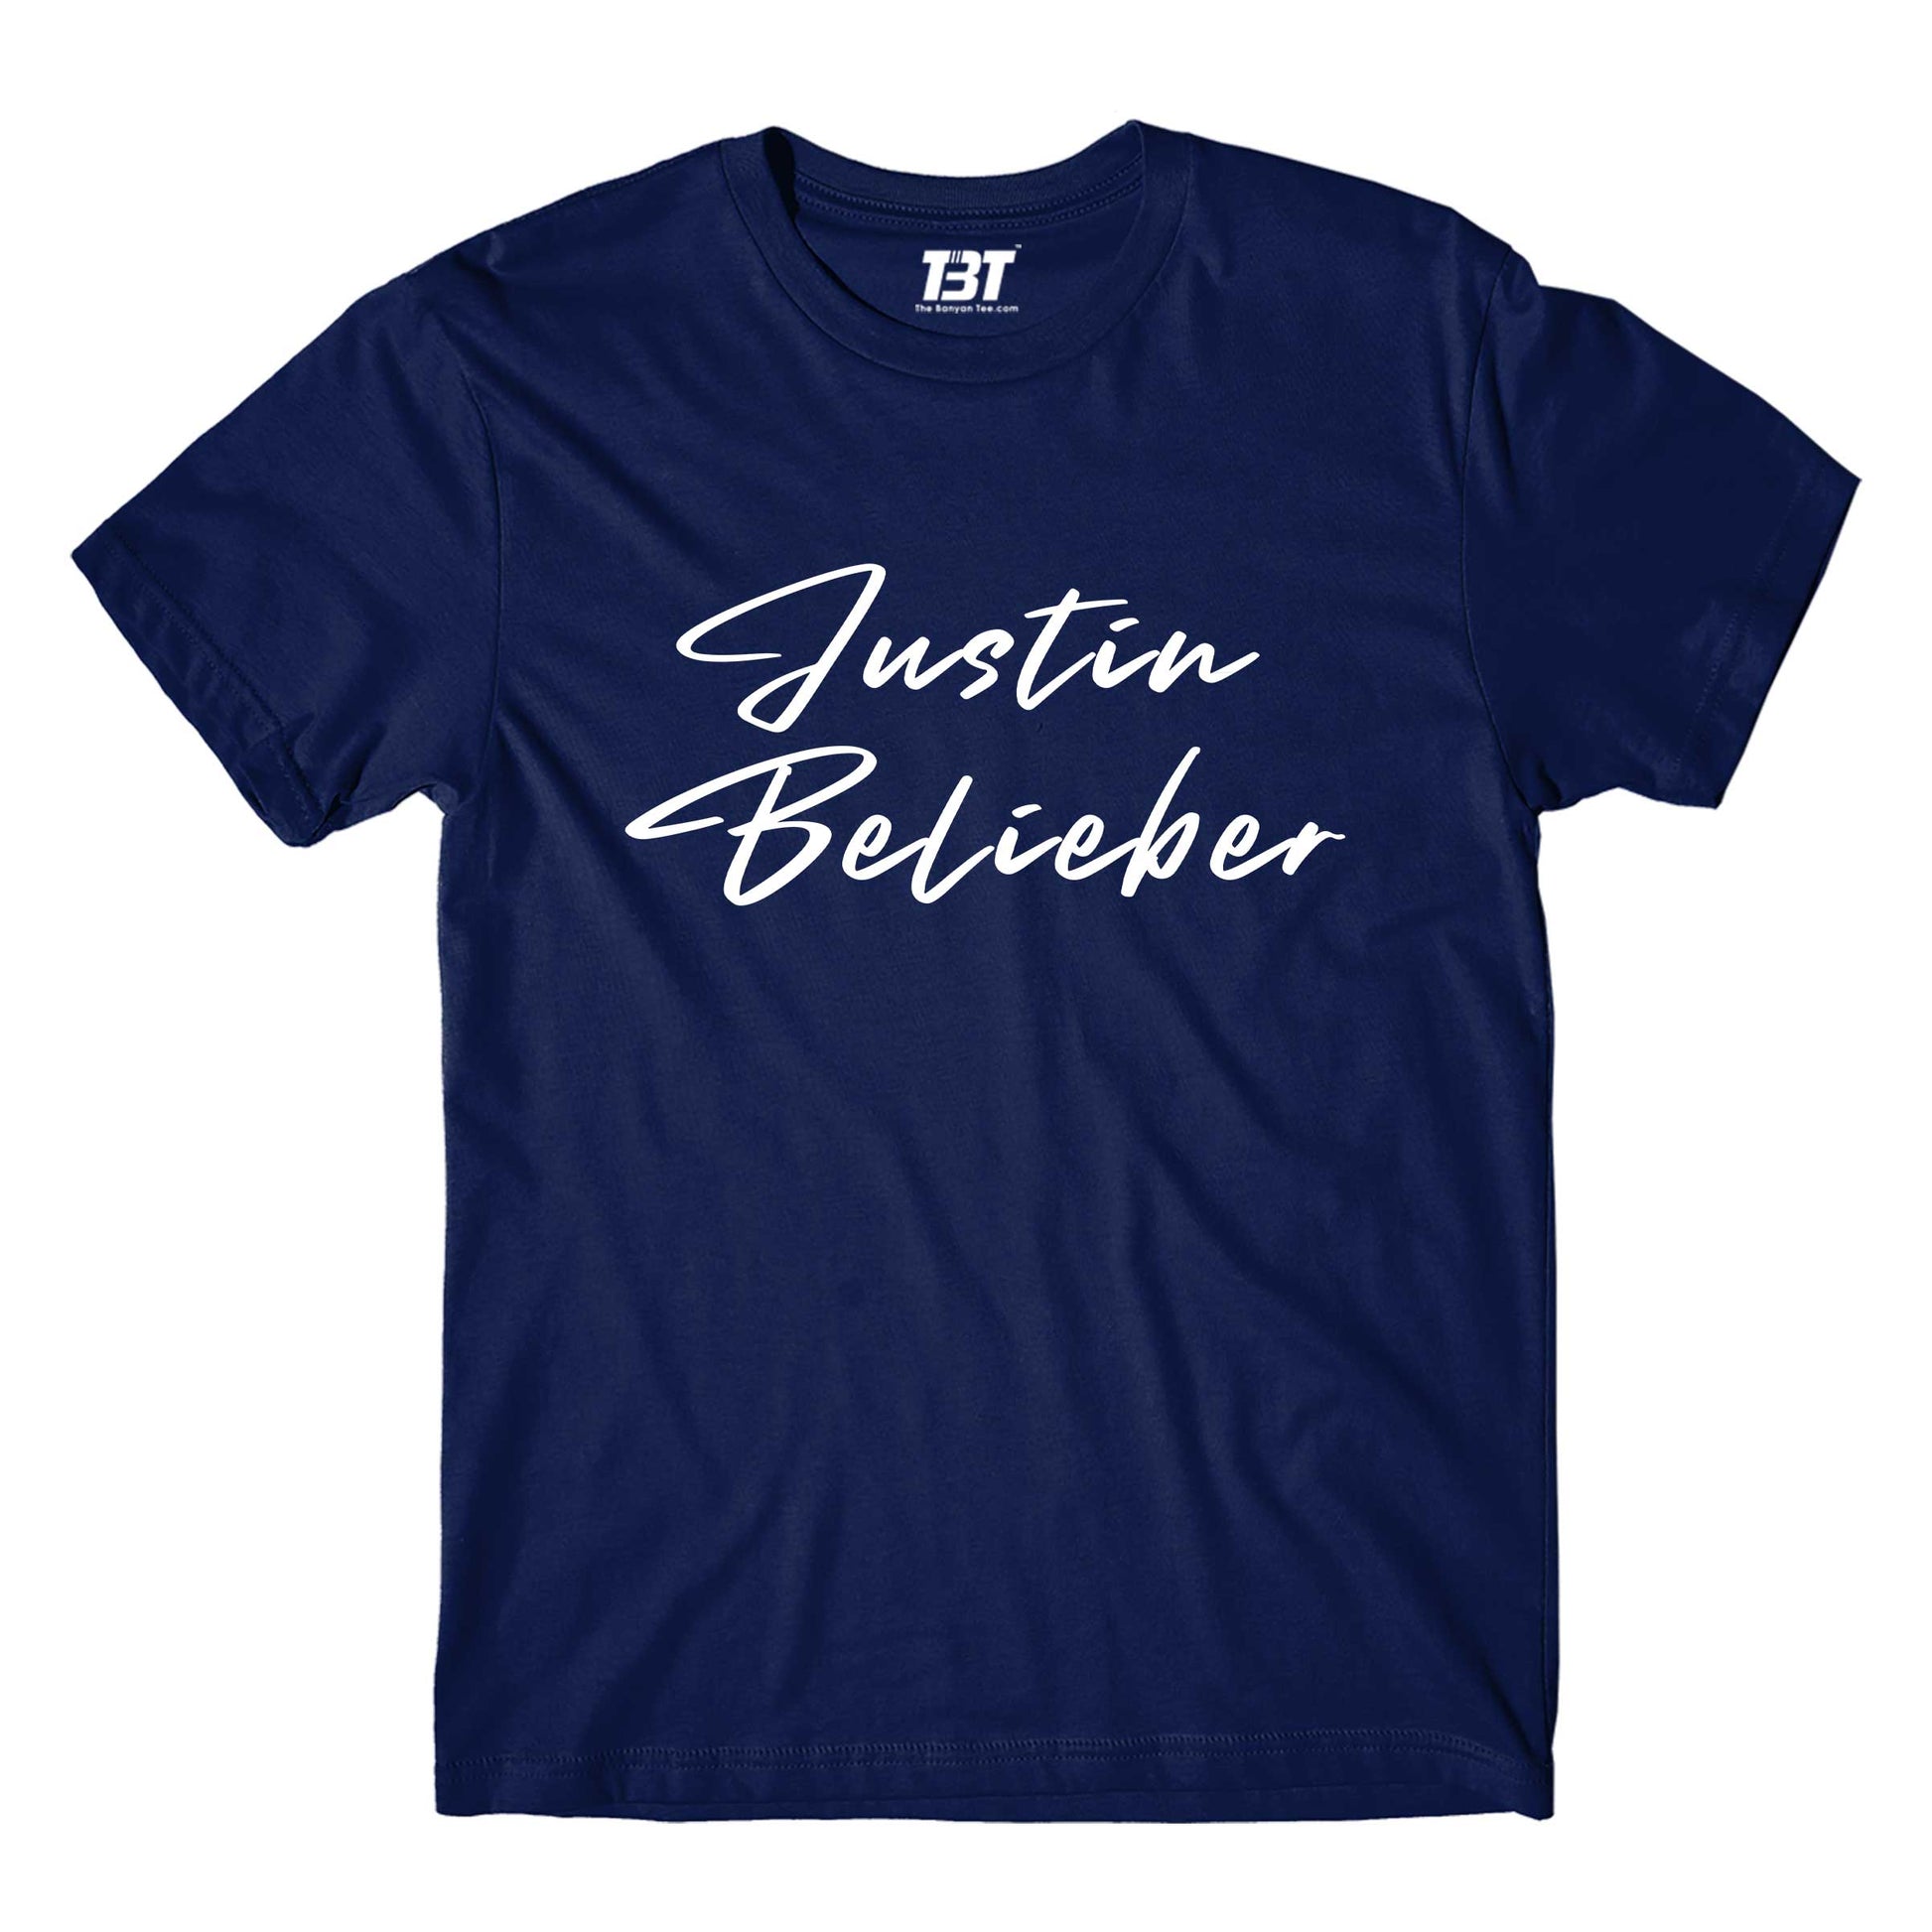 the banyan tee merch on sale Justin Bieber T shirt - On Sale - XS (Chest size 36 IN)